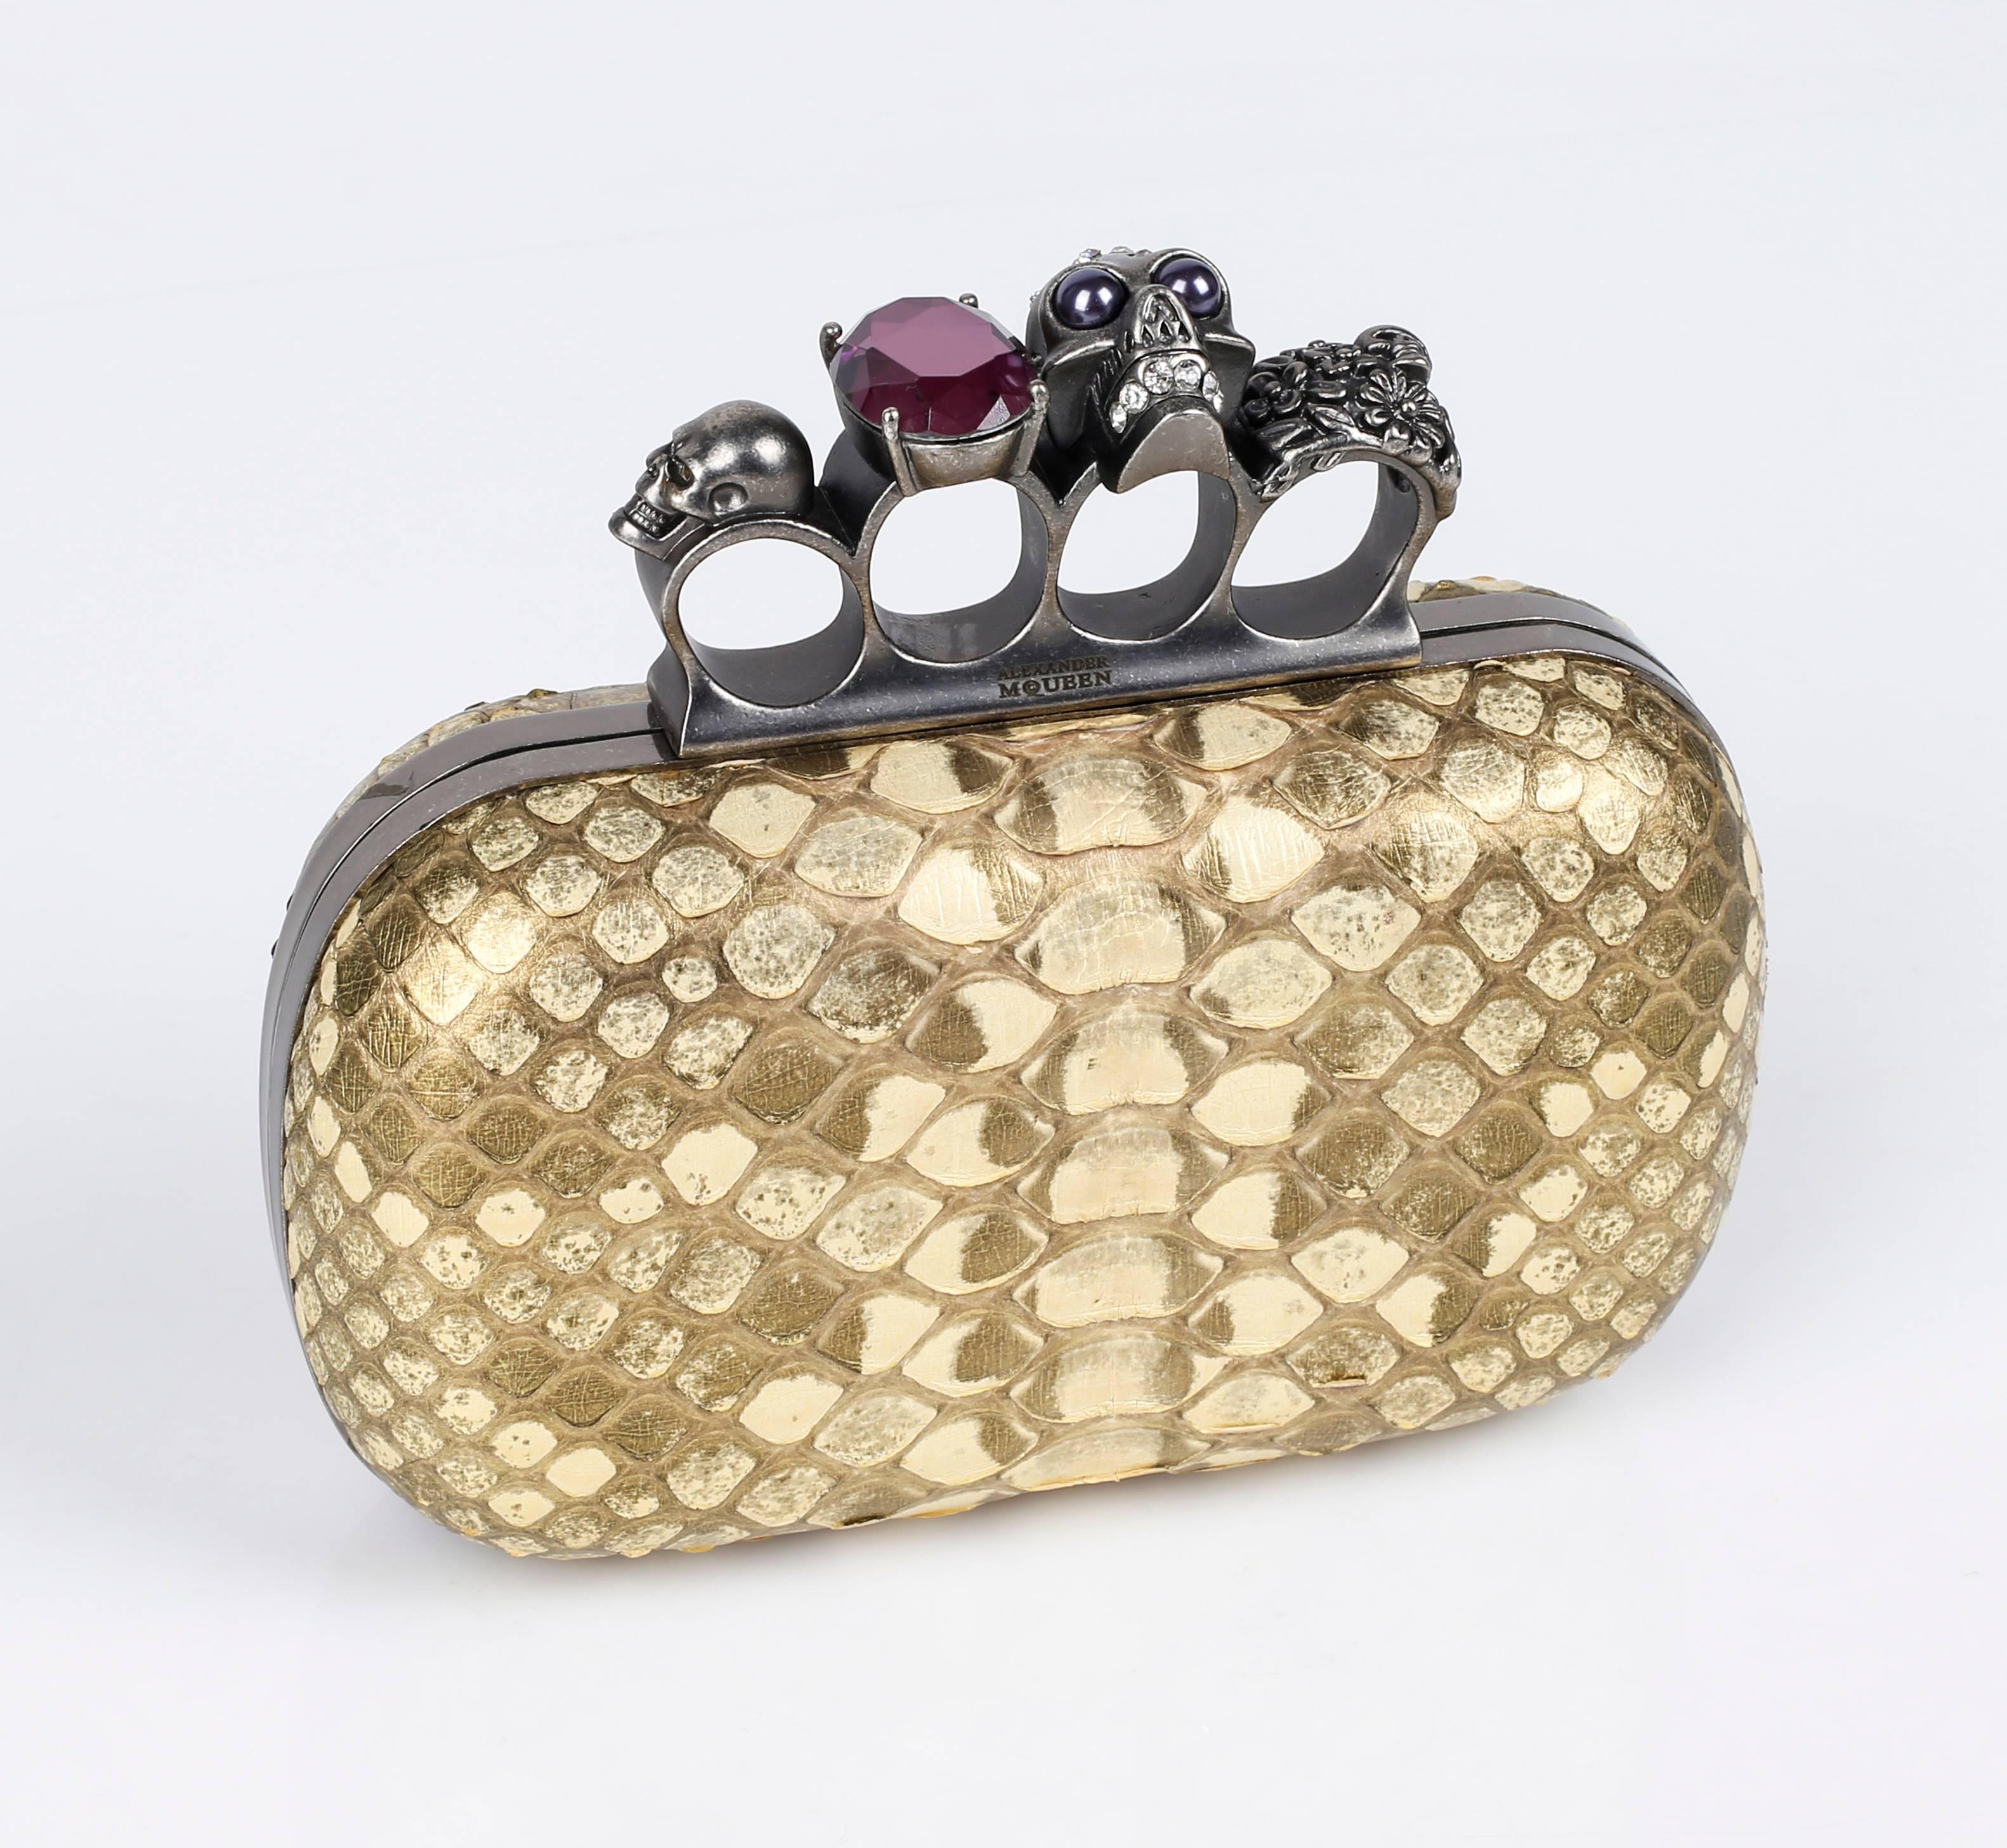 Alexander McQueen Spring/Summer 2010 metallic gold genuine python knuckle duster box clutch. Signature silver-toned hinged clasp with four knuckle rings; embellished in Swarovski crystals, purple gem, and various skulls. Framed hard shell with